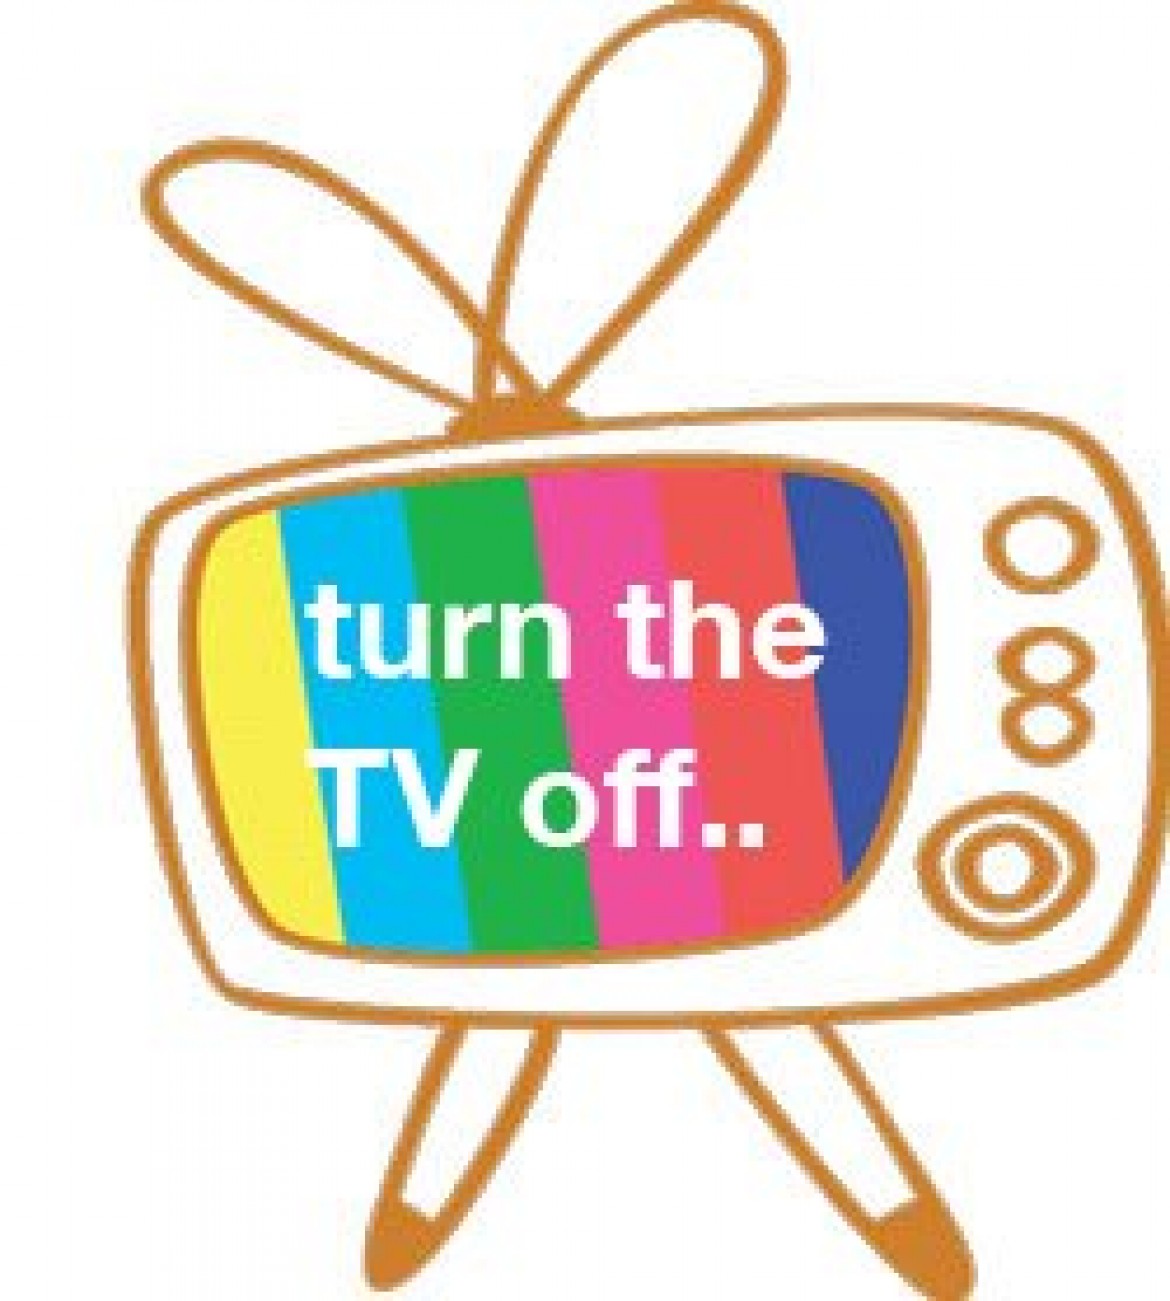 Can you turn off tv. Switch off TV картинки для детей. Turn on the TV. Turn on the TV for Kids. Turn on TV Clipart.